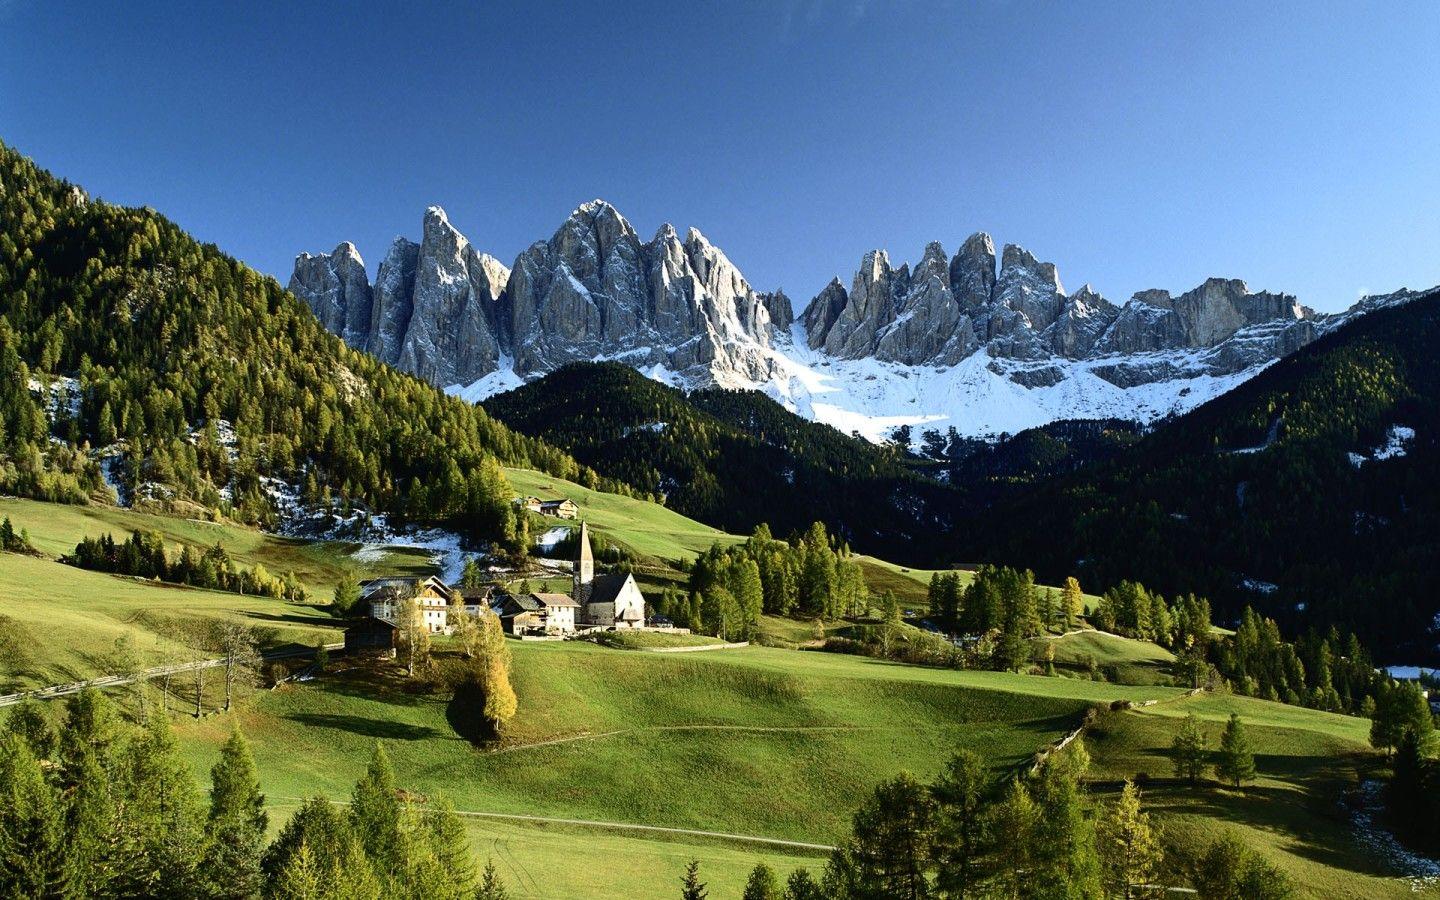 Gorgeous Mountain View in Italy widescreen wallpaper. Wide